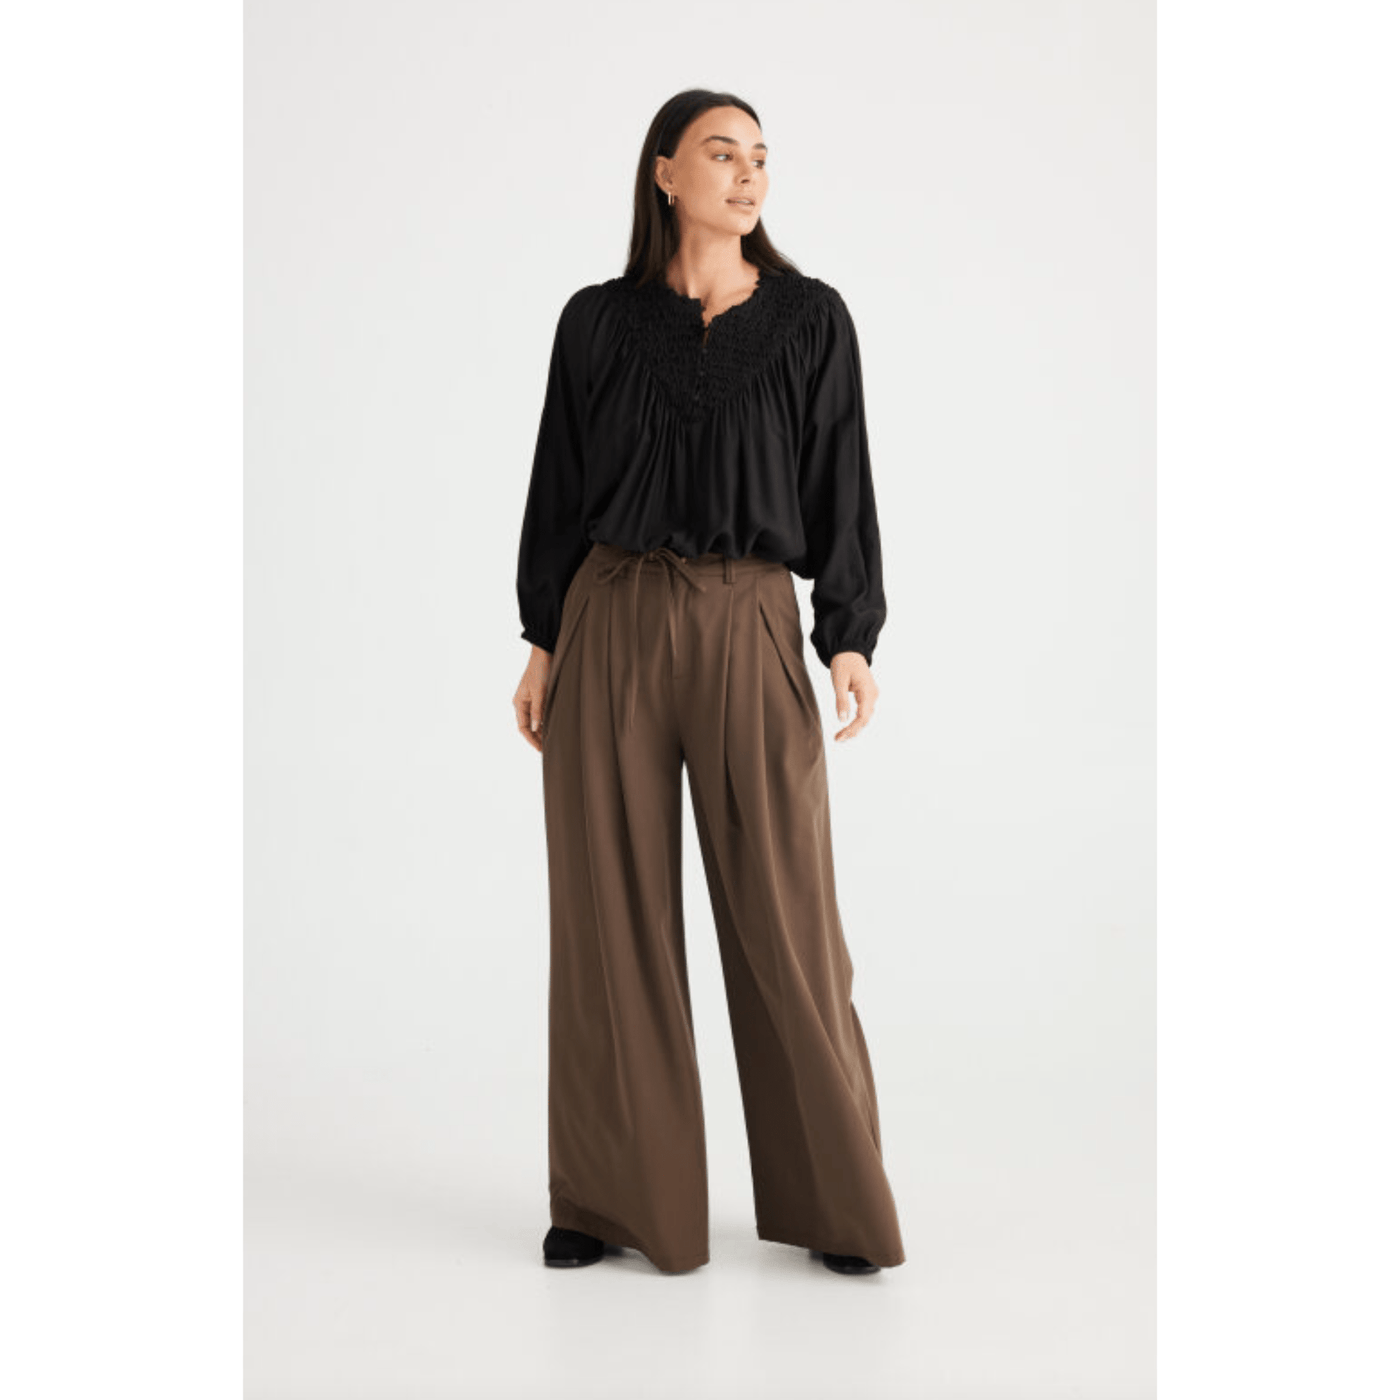 Brave and True Cici Pant Cocoa